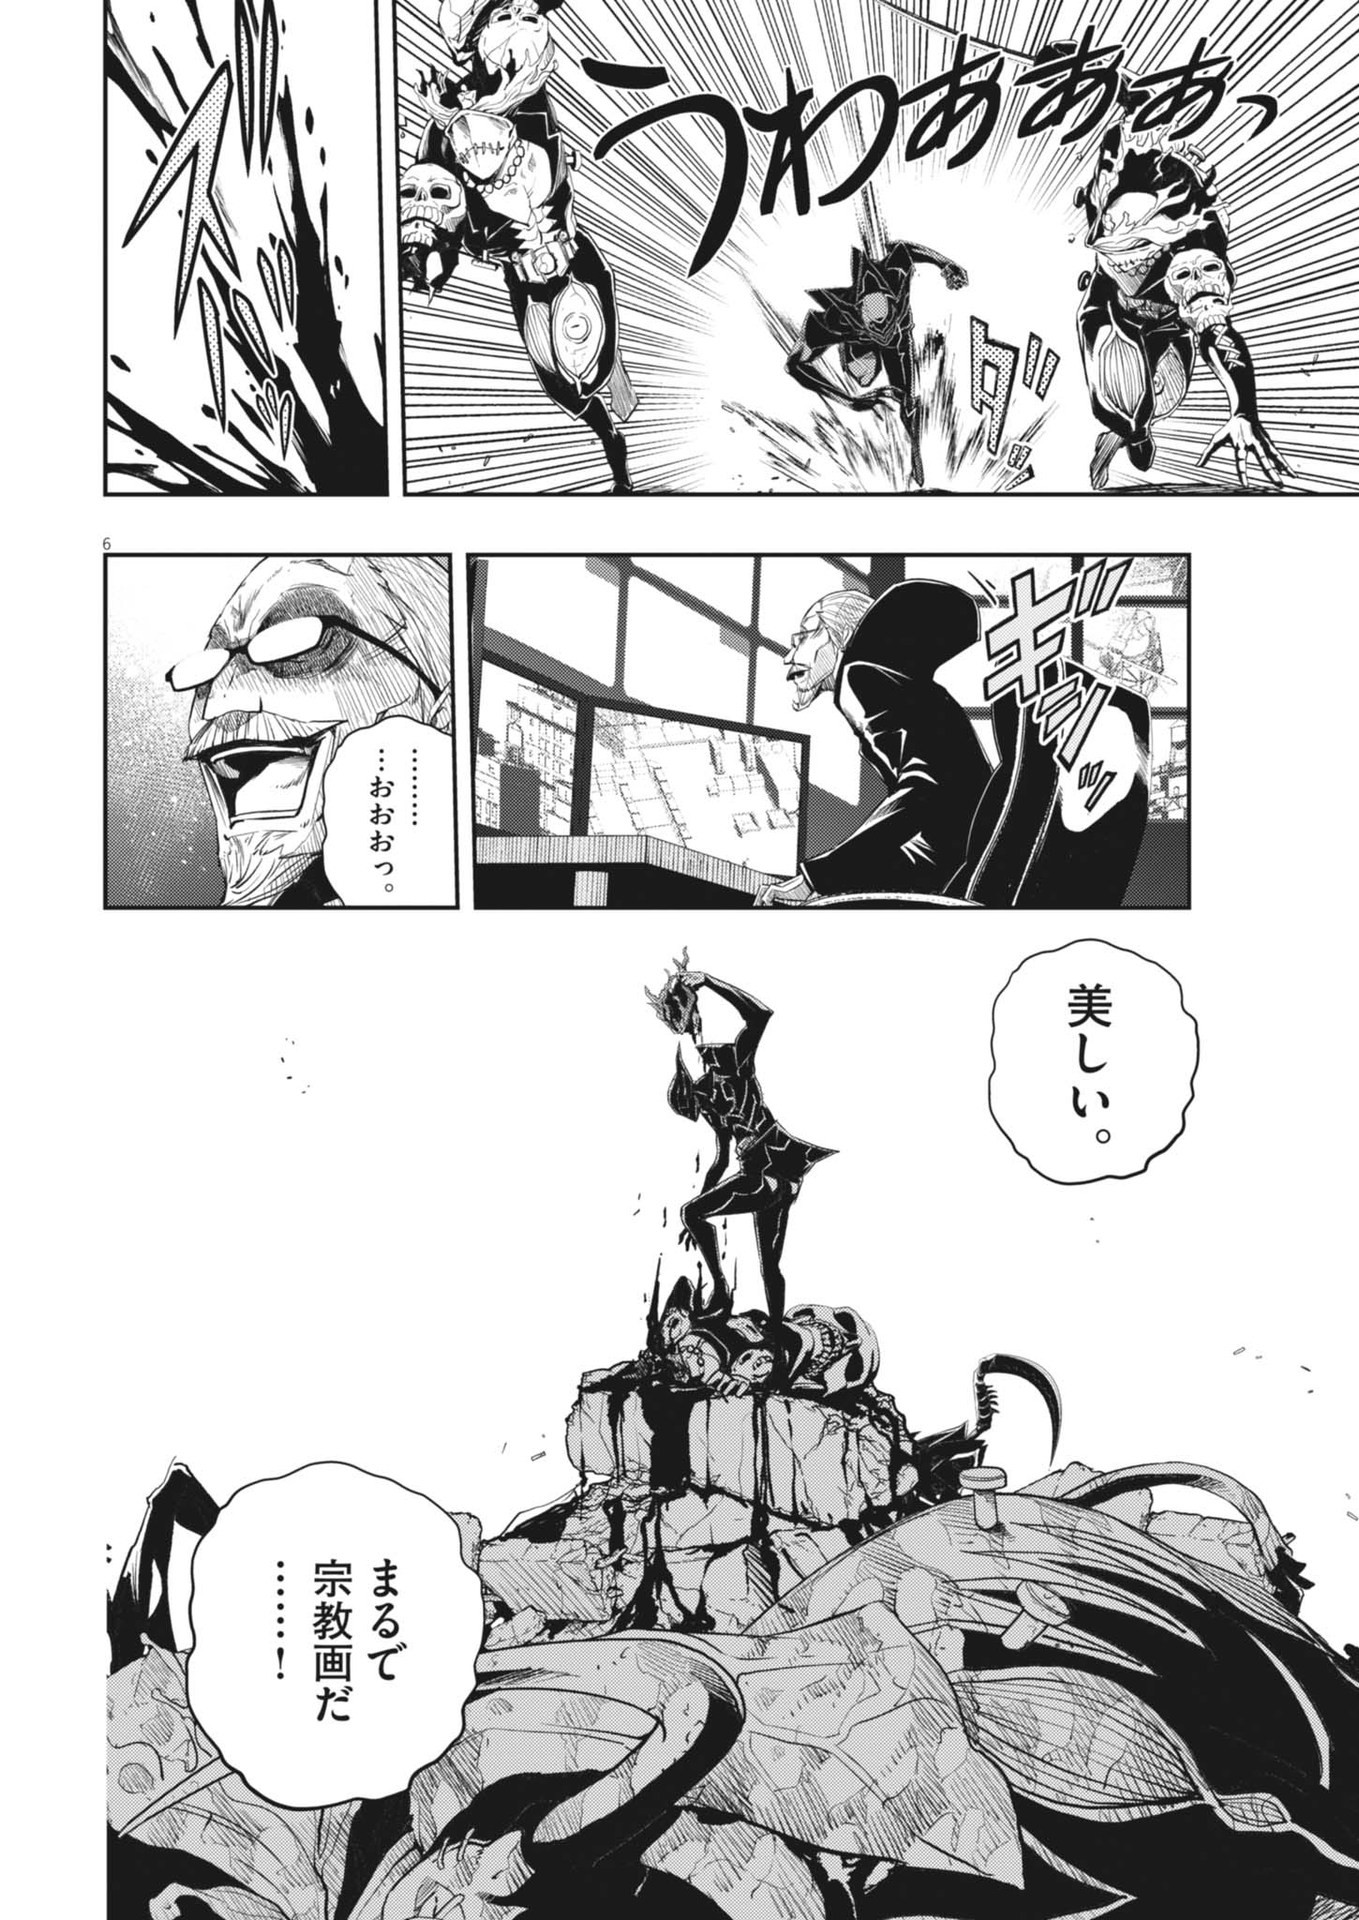 Kamen Rider W: Fuuto Tantei - Chapter 149 - Page 6